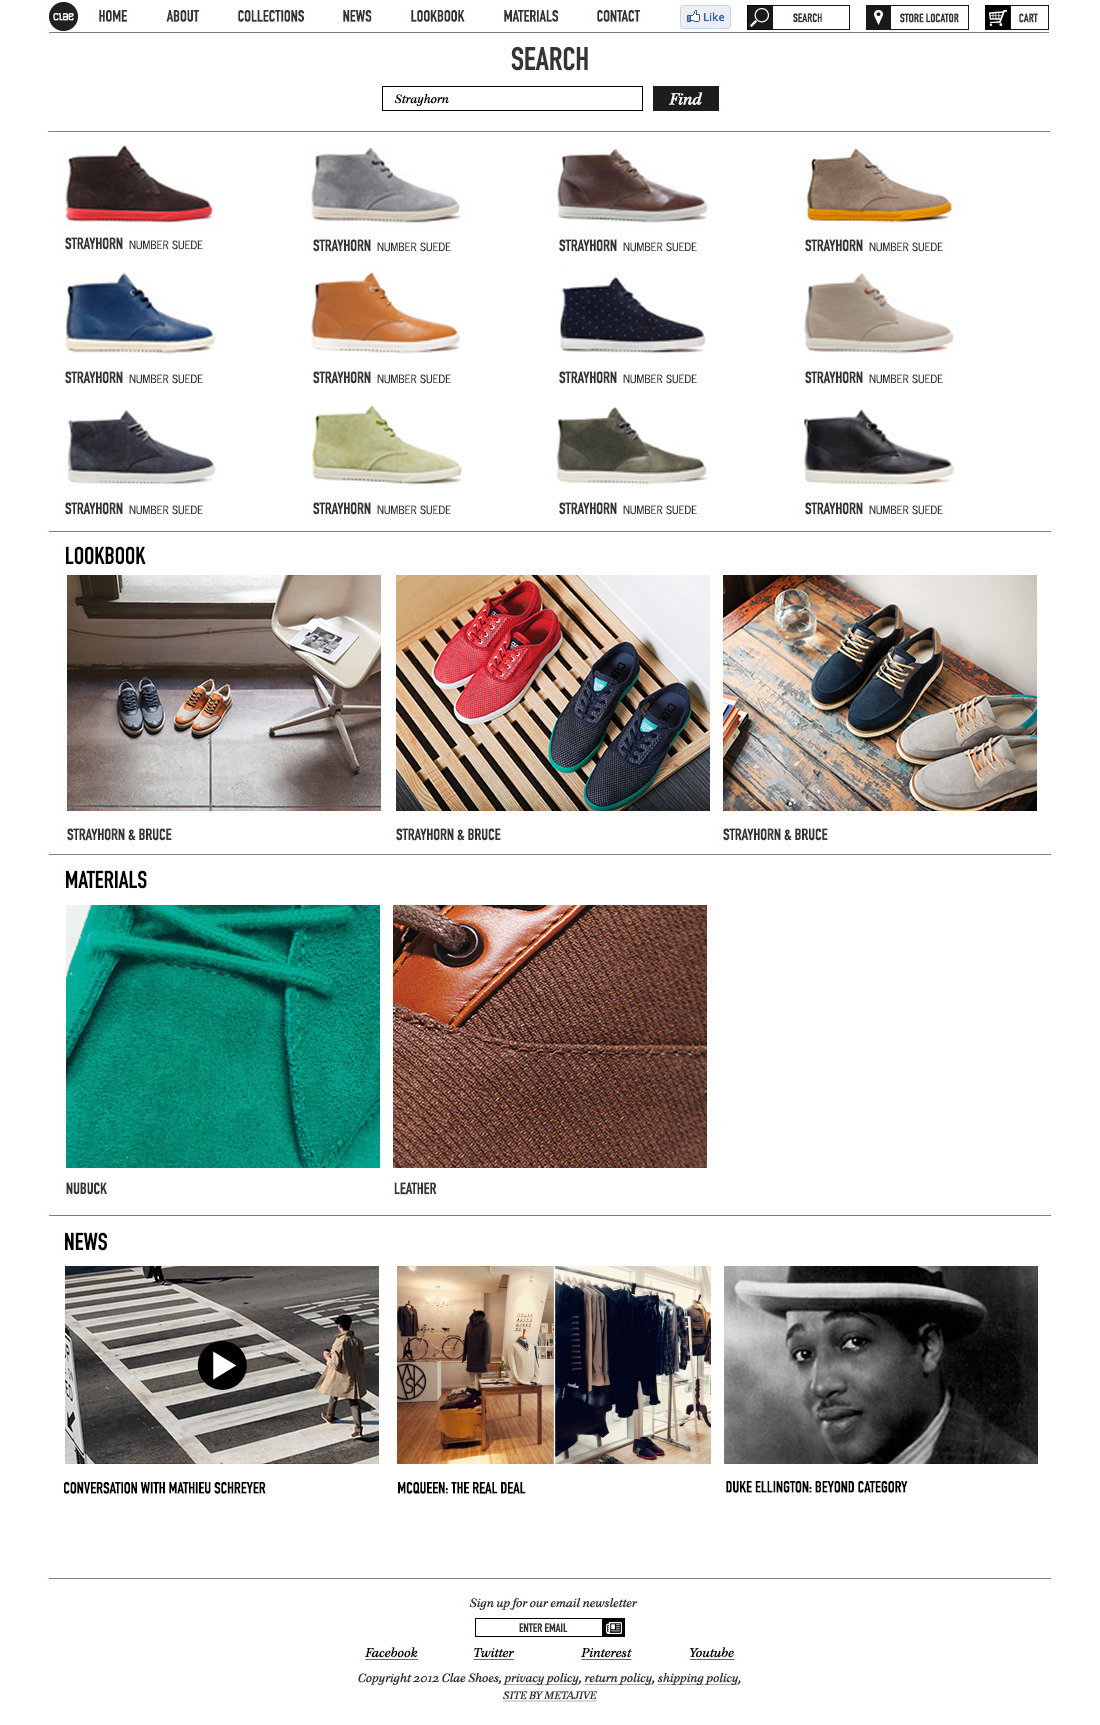 clae  shoes  Lifestyle Web footwear gif brand mens fashion online store White  simple user interface cool sneakers fixie